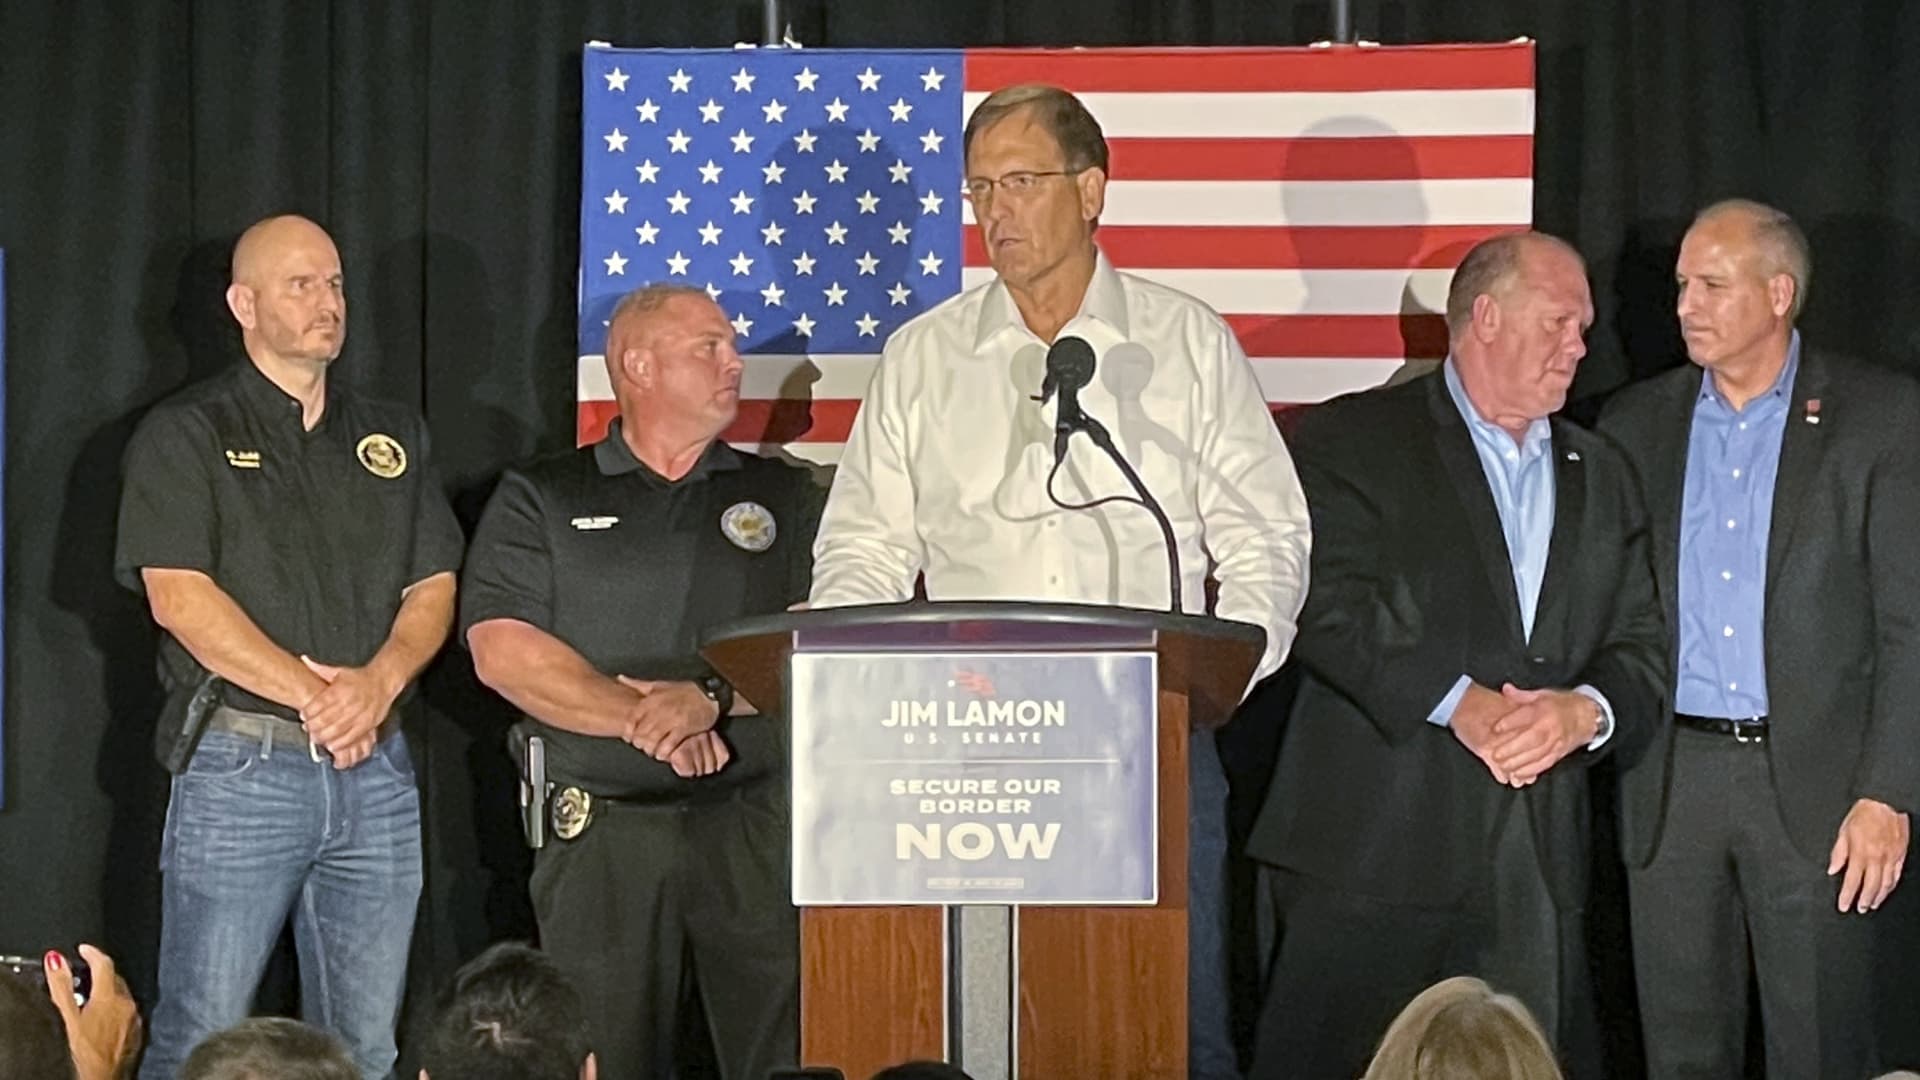 Arizona businessman Jim Lamon, a Republican candidate for U.S. Senate, speaks to supporters as he accepts an endorsement from law enforcement groups in Phoenix on Wednesday, Sept. 15, 2021.